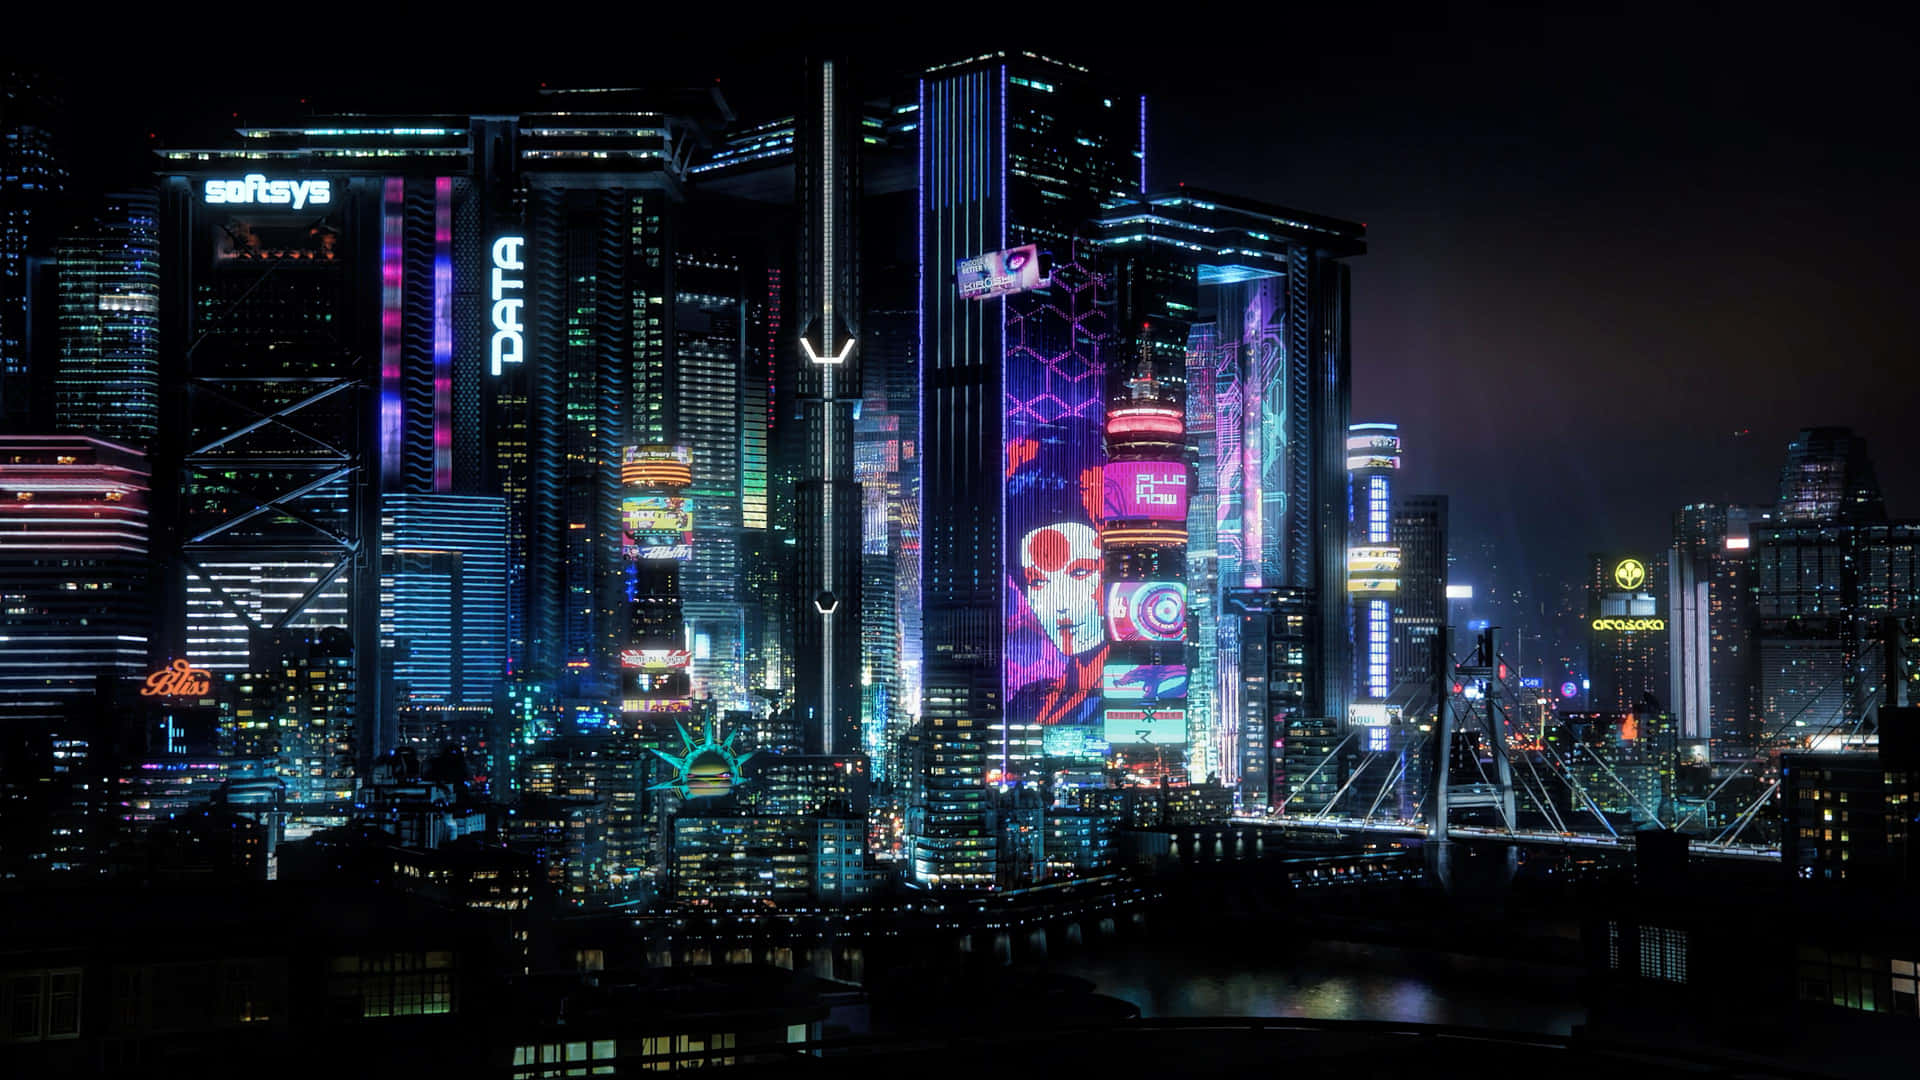 "A glimpse of the neon lights in the night sky of Cyberpunk Night City" Wallpaper